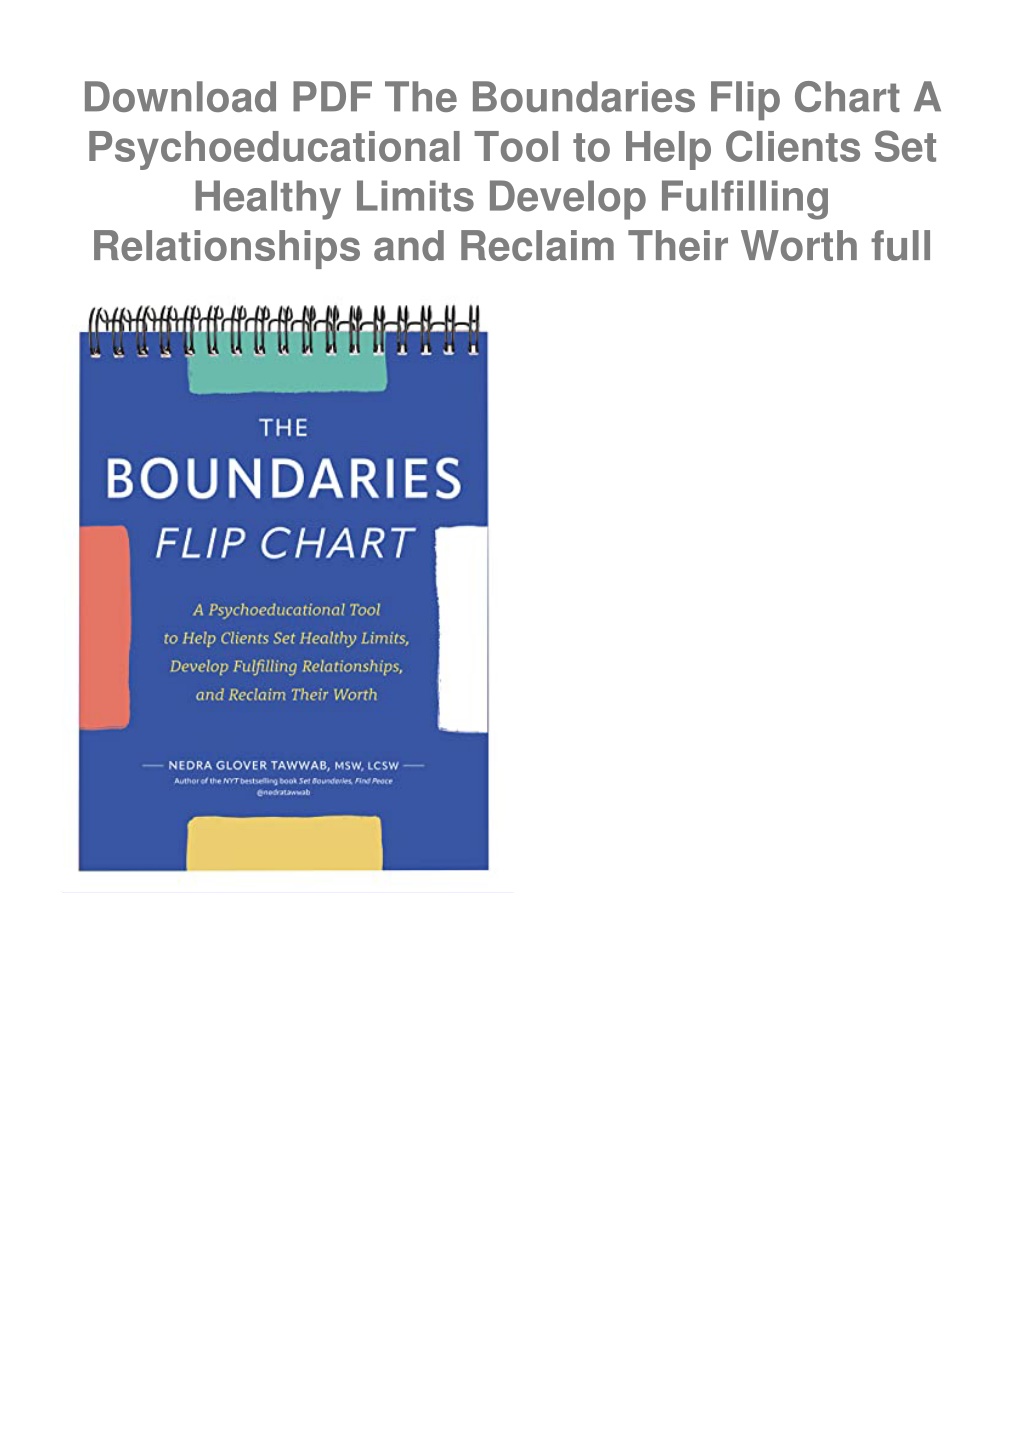 The Boundaries Flip Chart: A Psychoeducational Tool to Help Clients Set  Healthy Limits, Develop Fulfilling Relationships, and Reclaim Their Worth